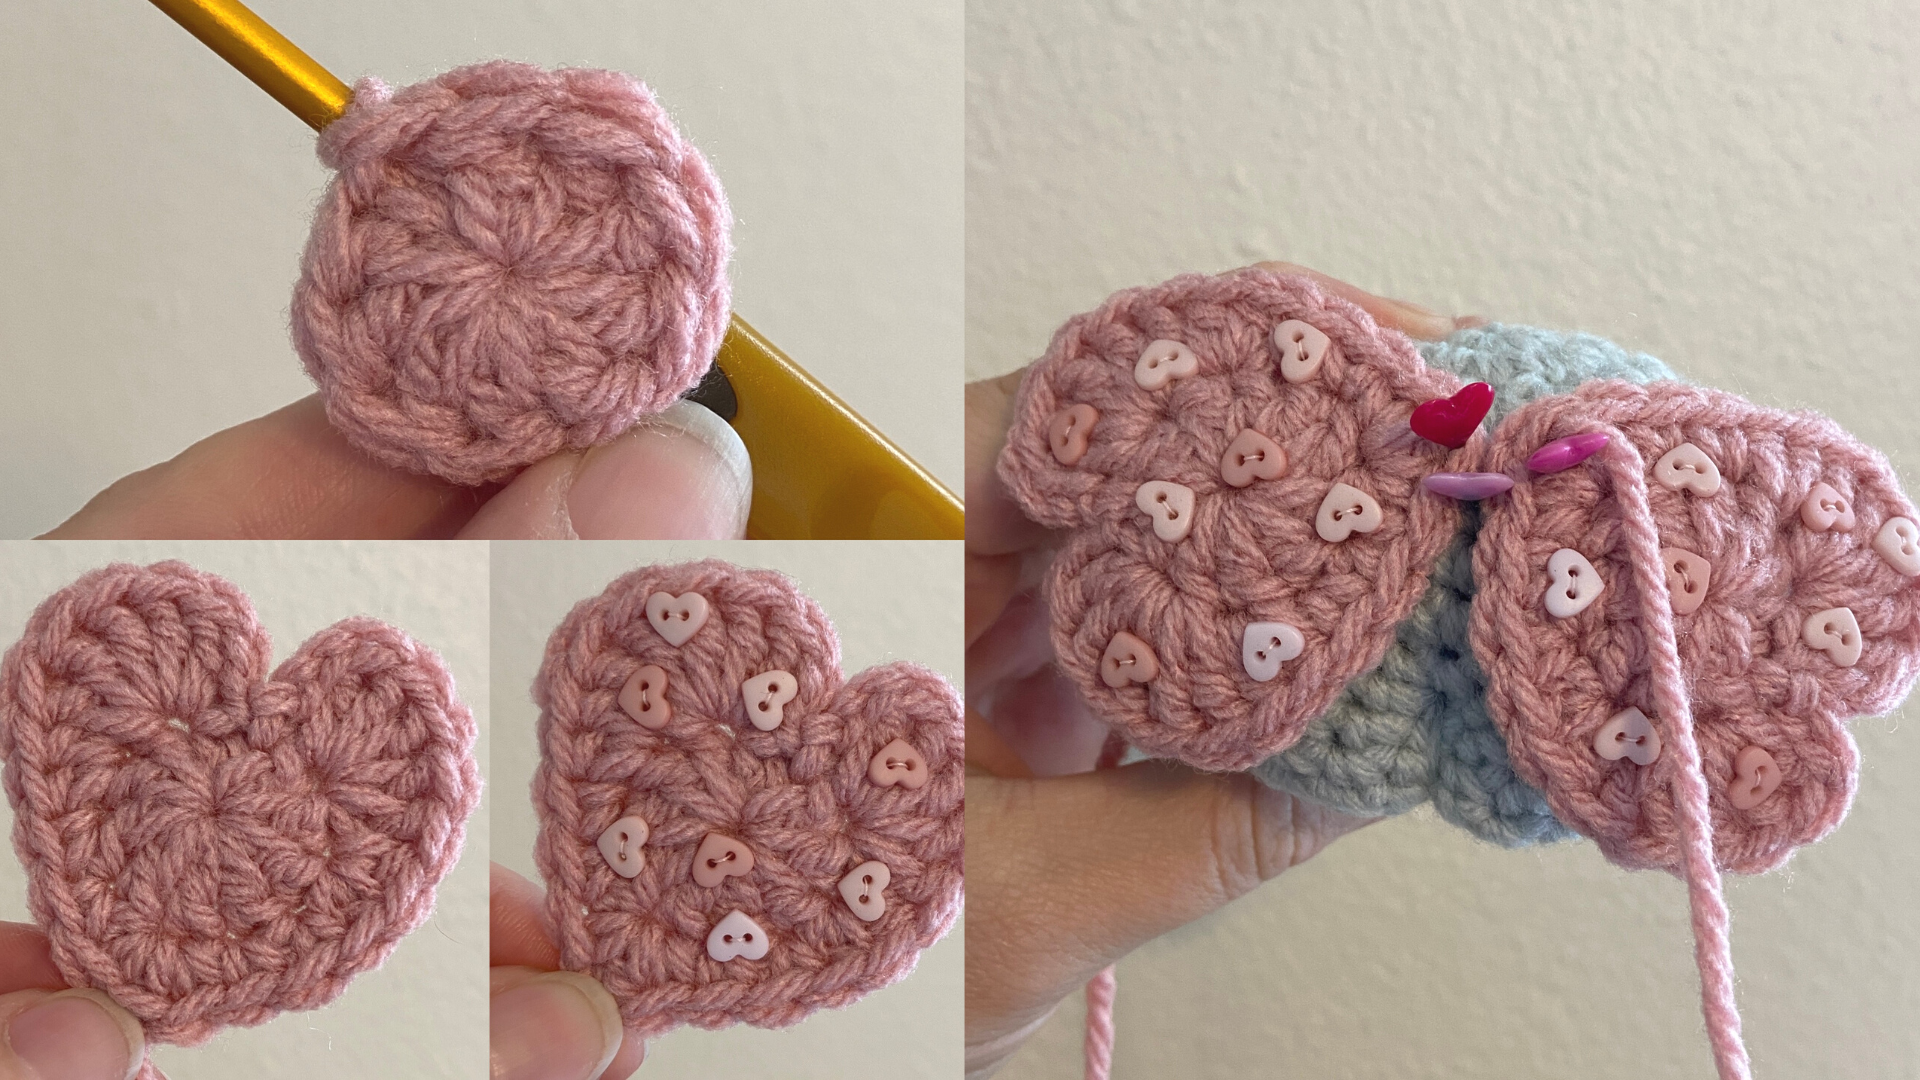 31+ Easy and Unique Crochet Stitches for Your Next Project - Sarah